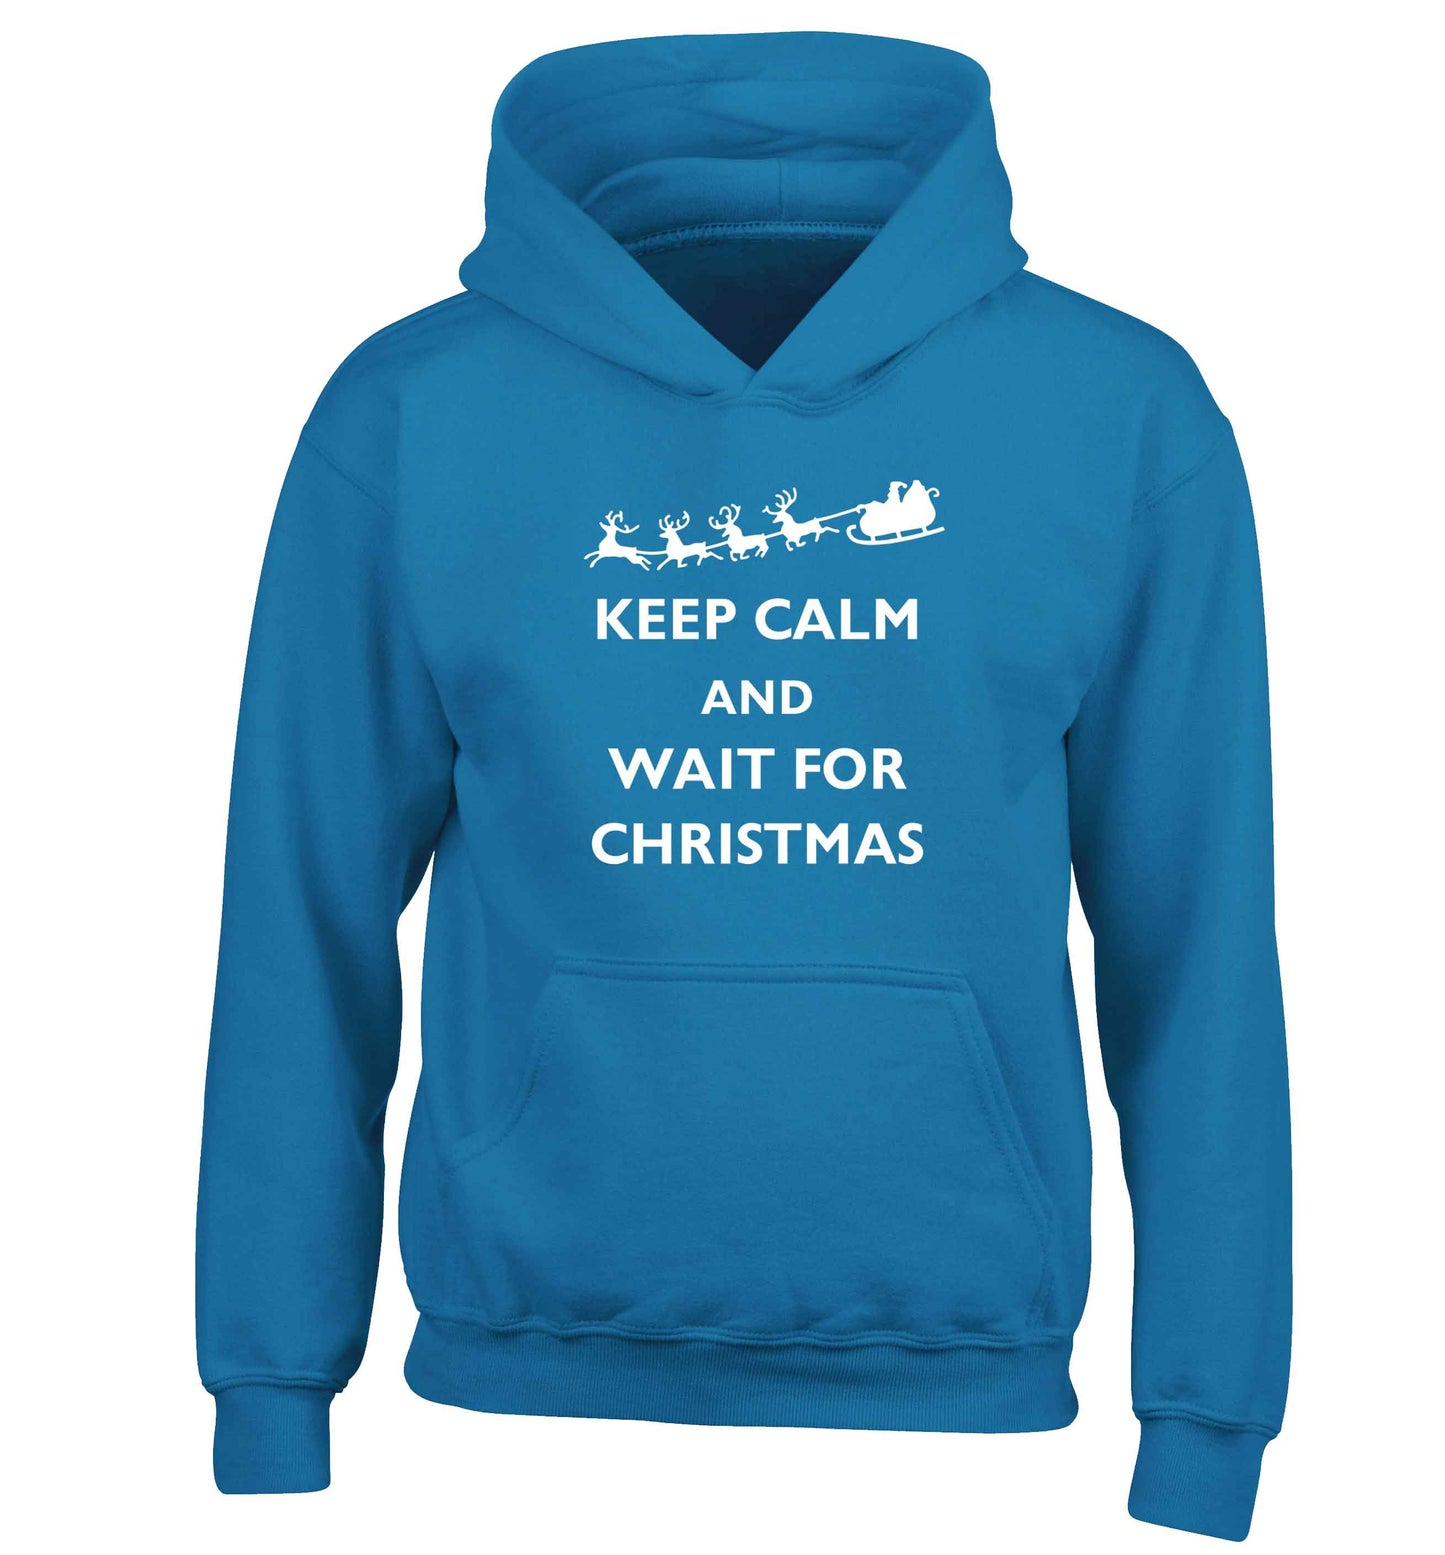 Keep calm and wait for Christmas children's blue hoodie 12-13 Years